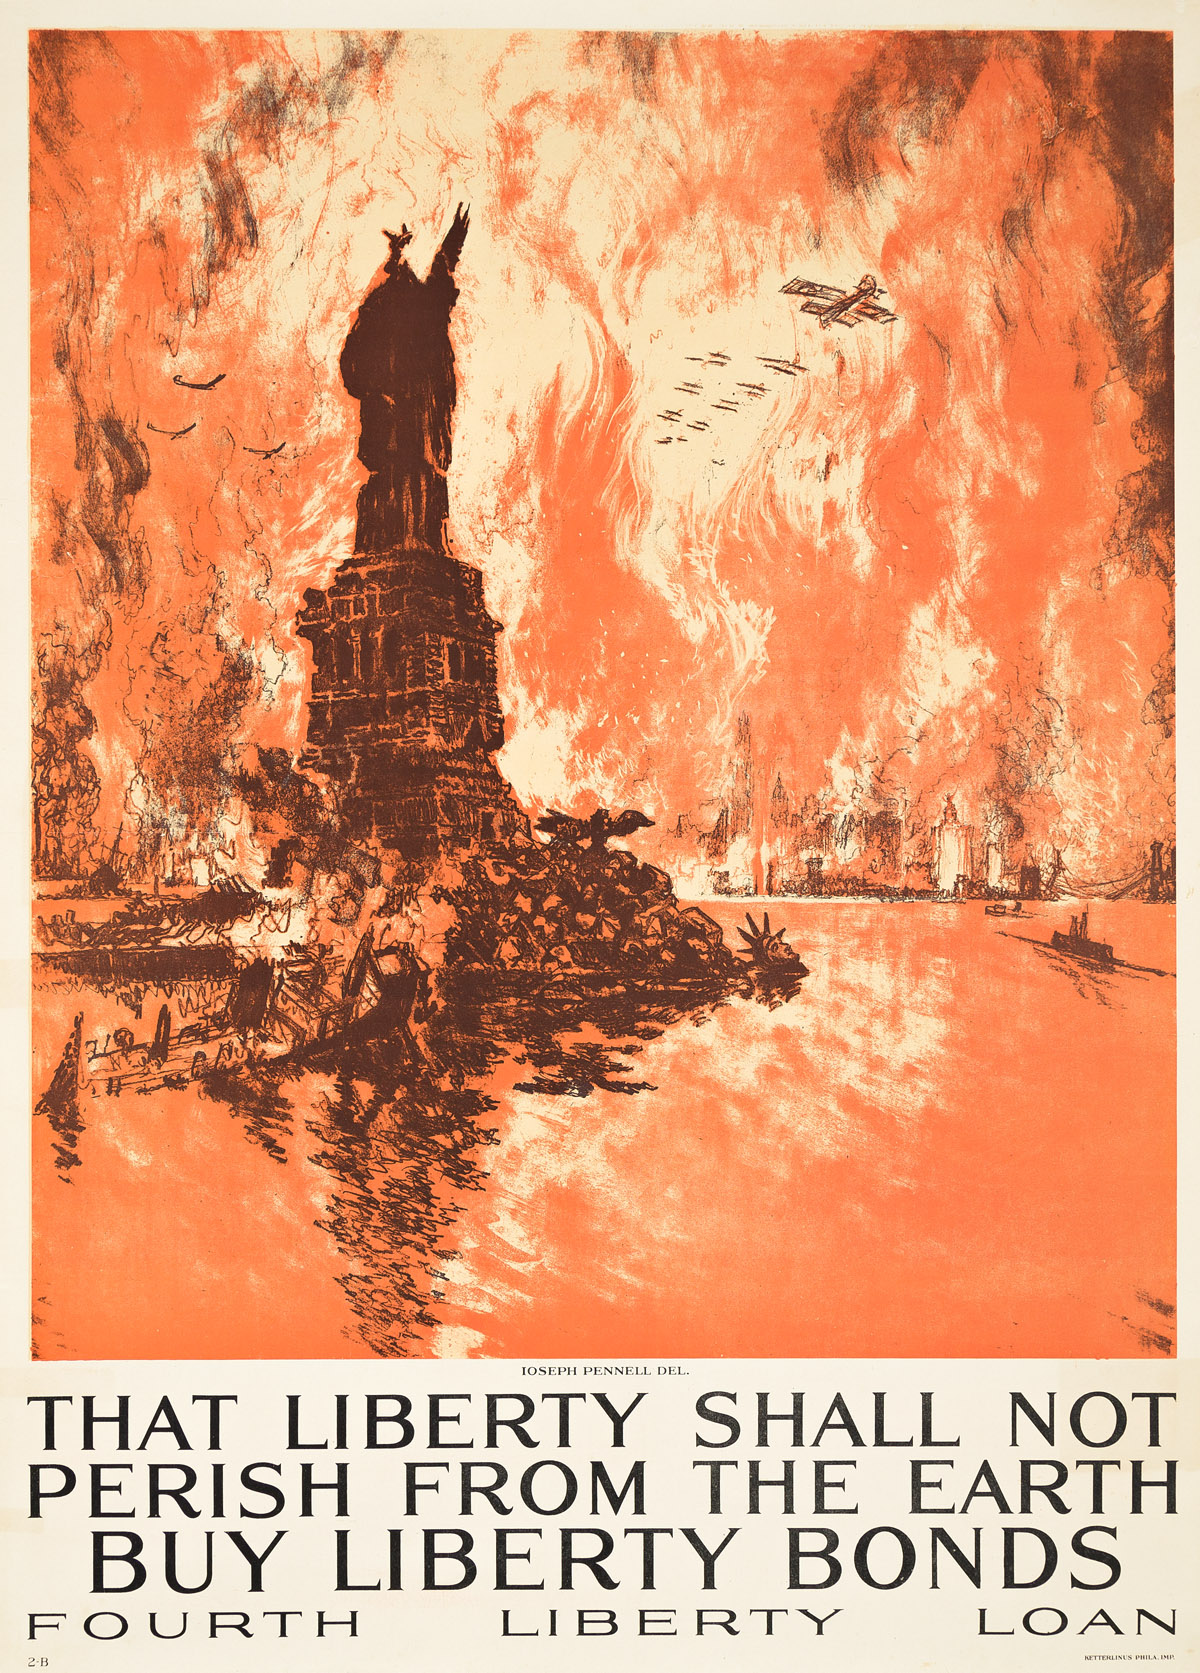 JOSEPH PENNELL (1857-1926).  THAT LIBERTY SHALL NOT PERISH FROM THE EARTH. 1918. 41x30 inches, 104x76¼ cm. Ketterlinus, Philadelphia.